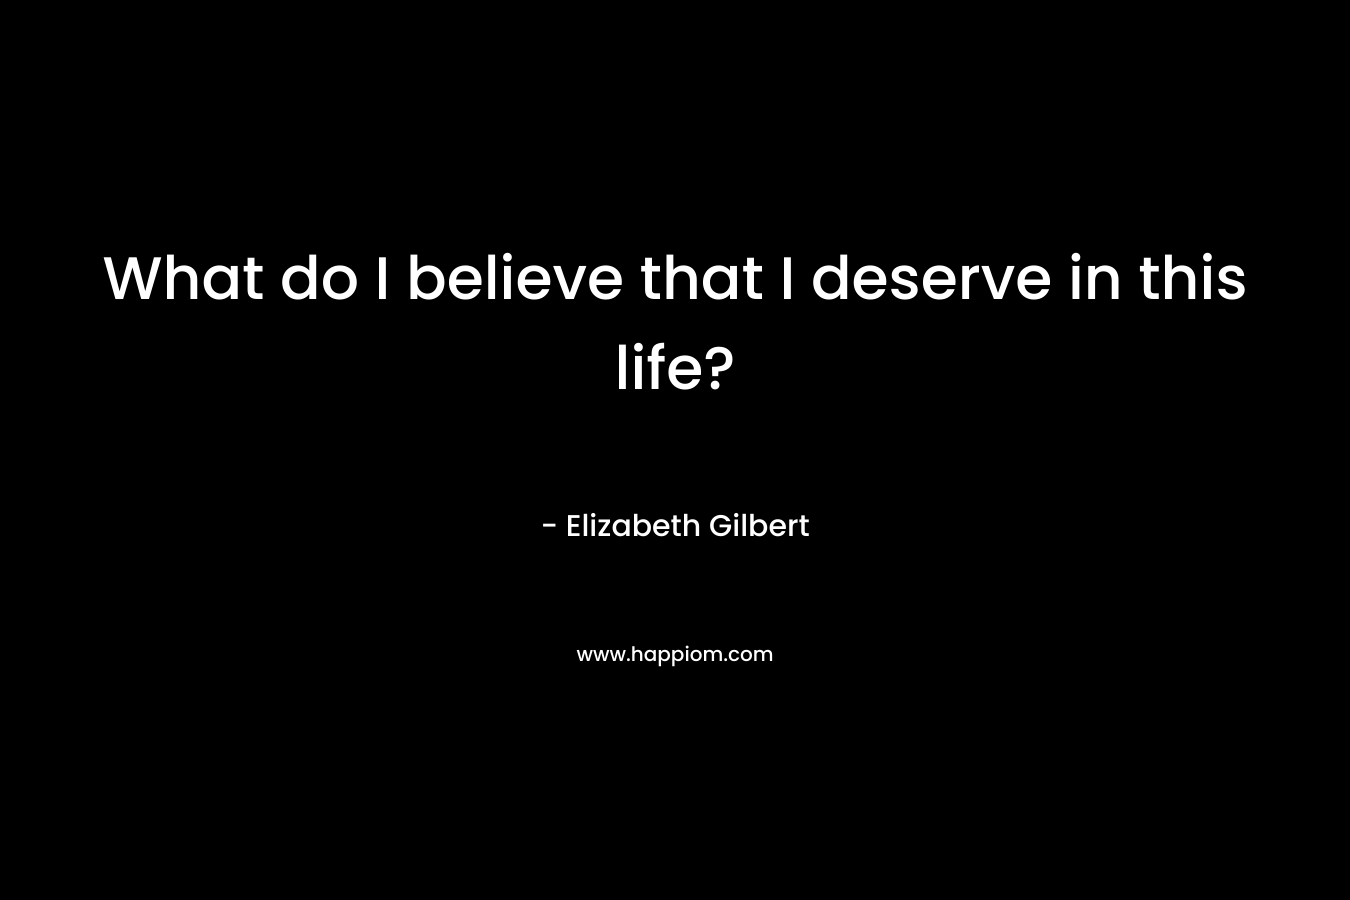 What do I believe that I deserve in this life?